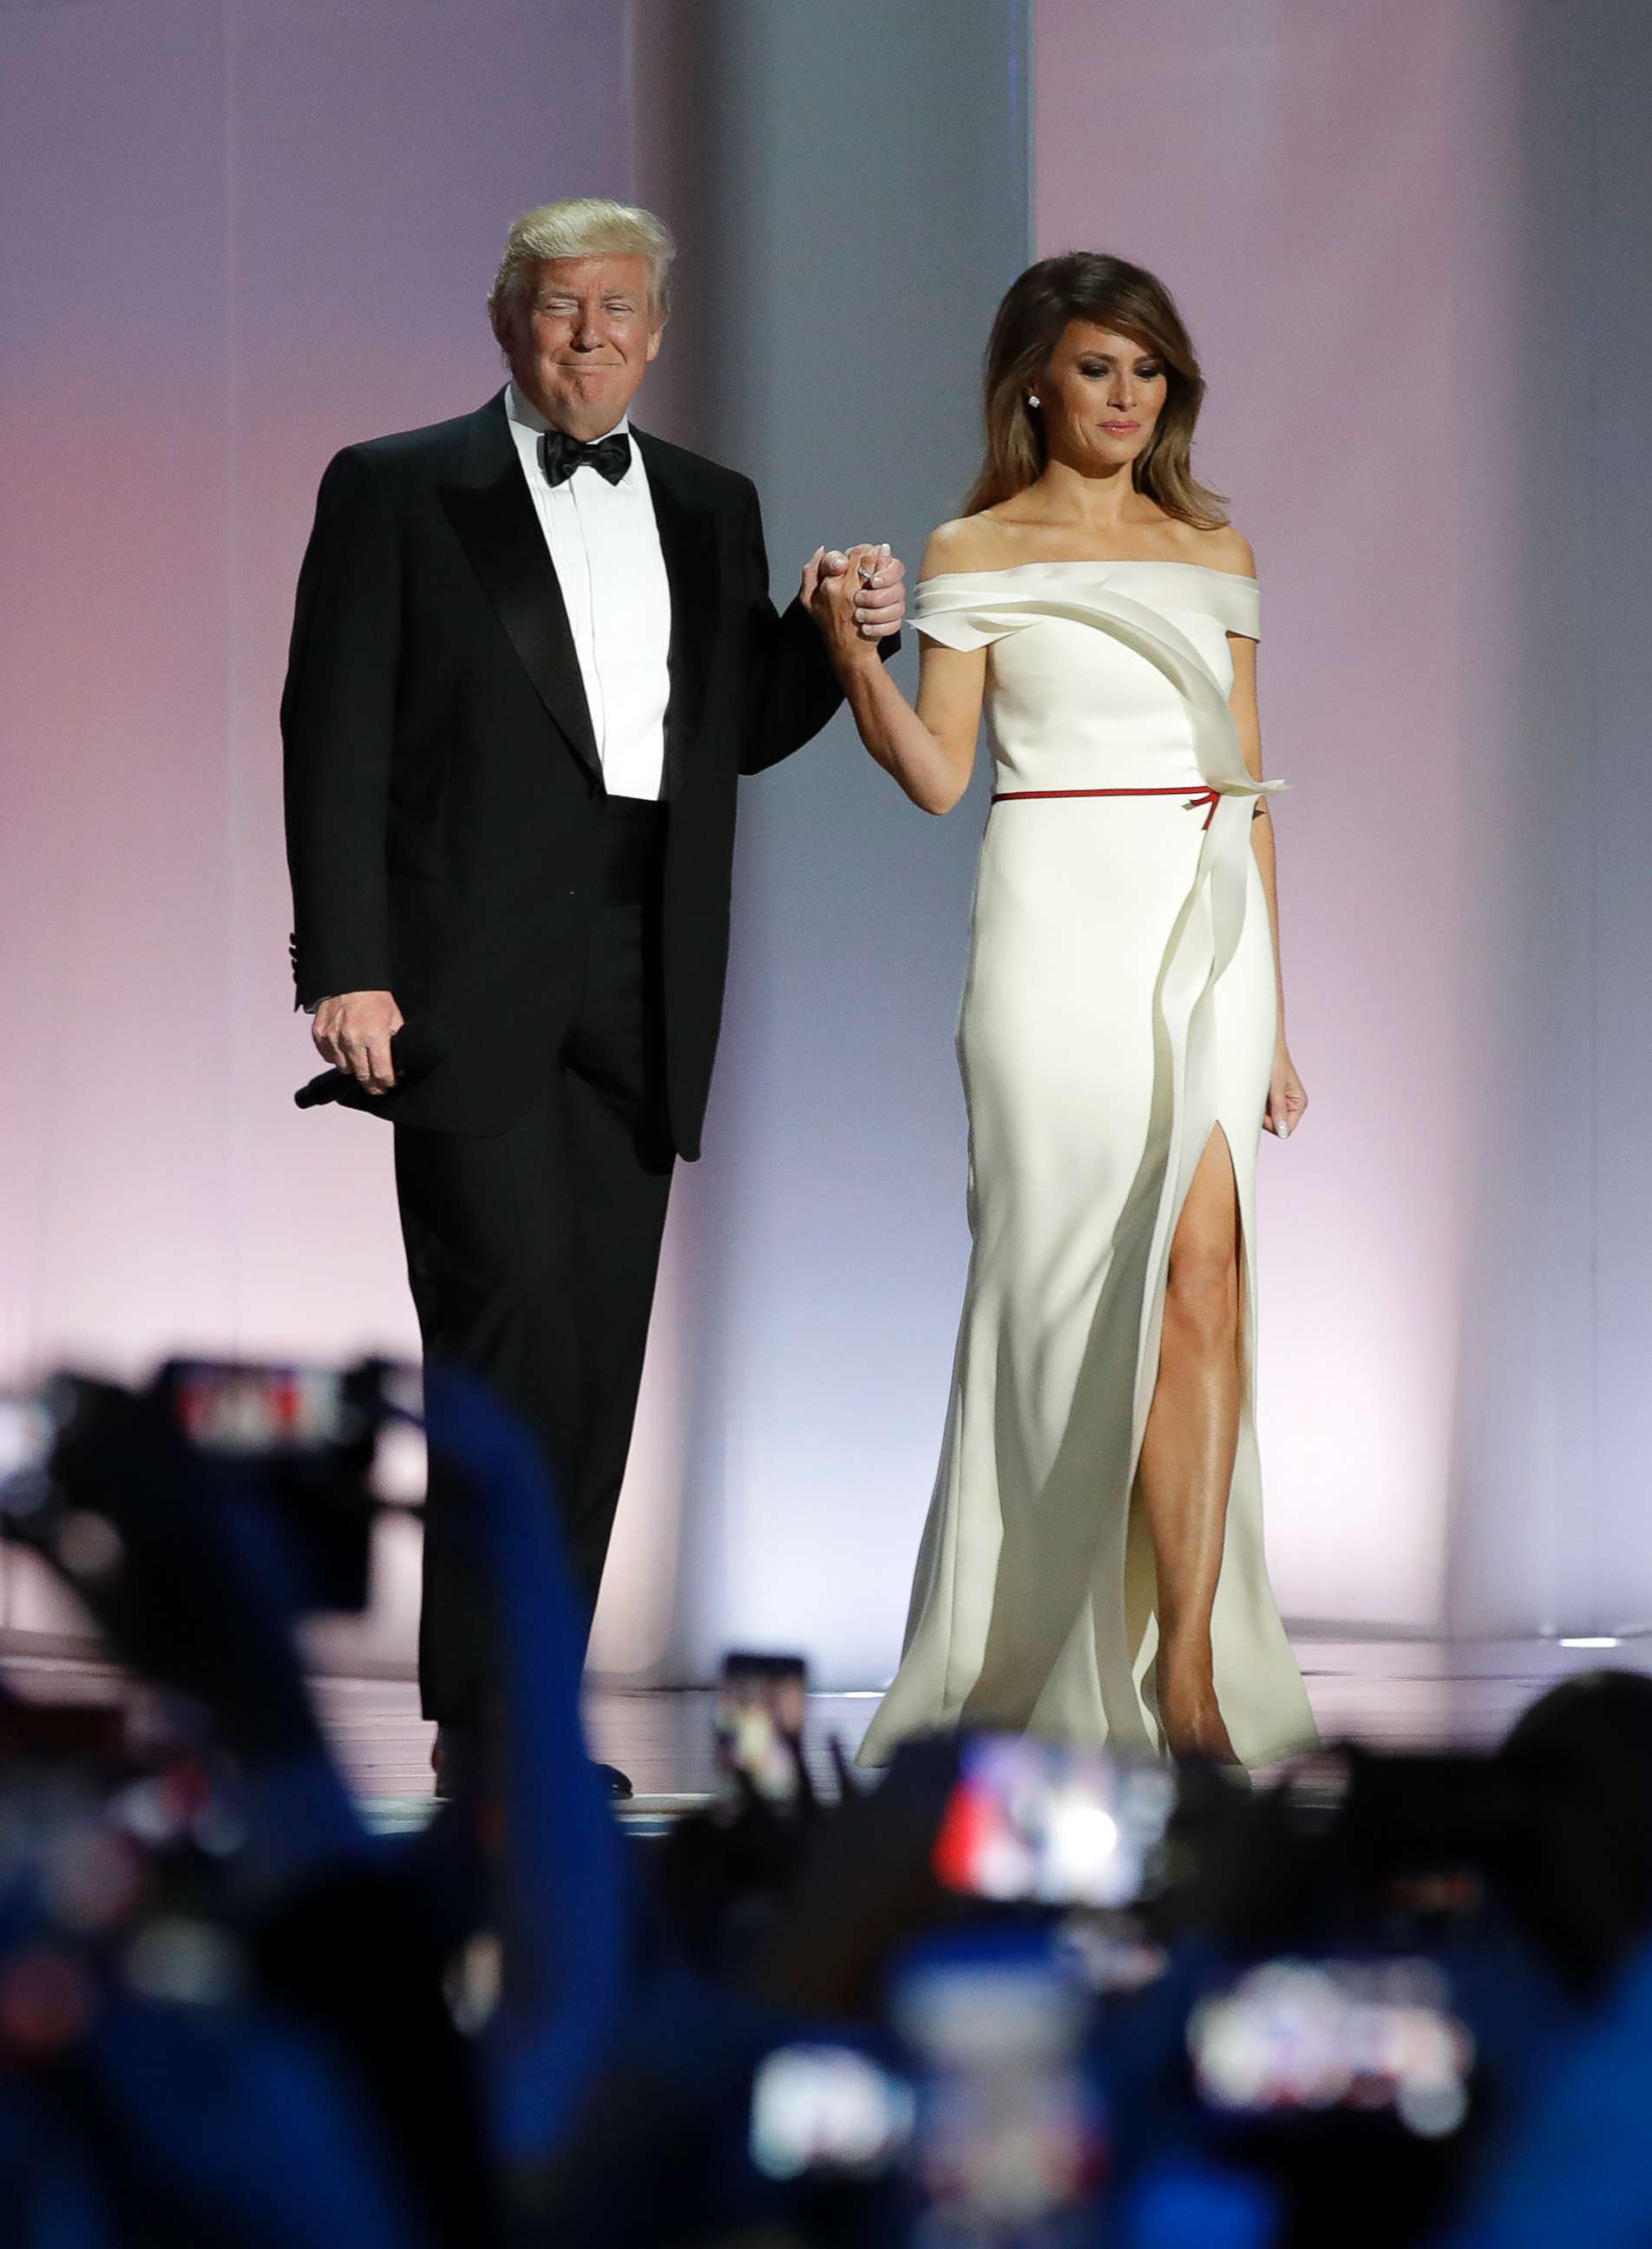 PHOTO: President Donald Trump arrives with first lady Melania Trump at the Liberty Ball in Washington, Jan. 20, 2017.